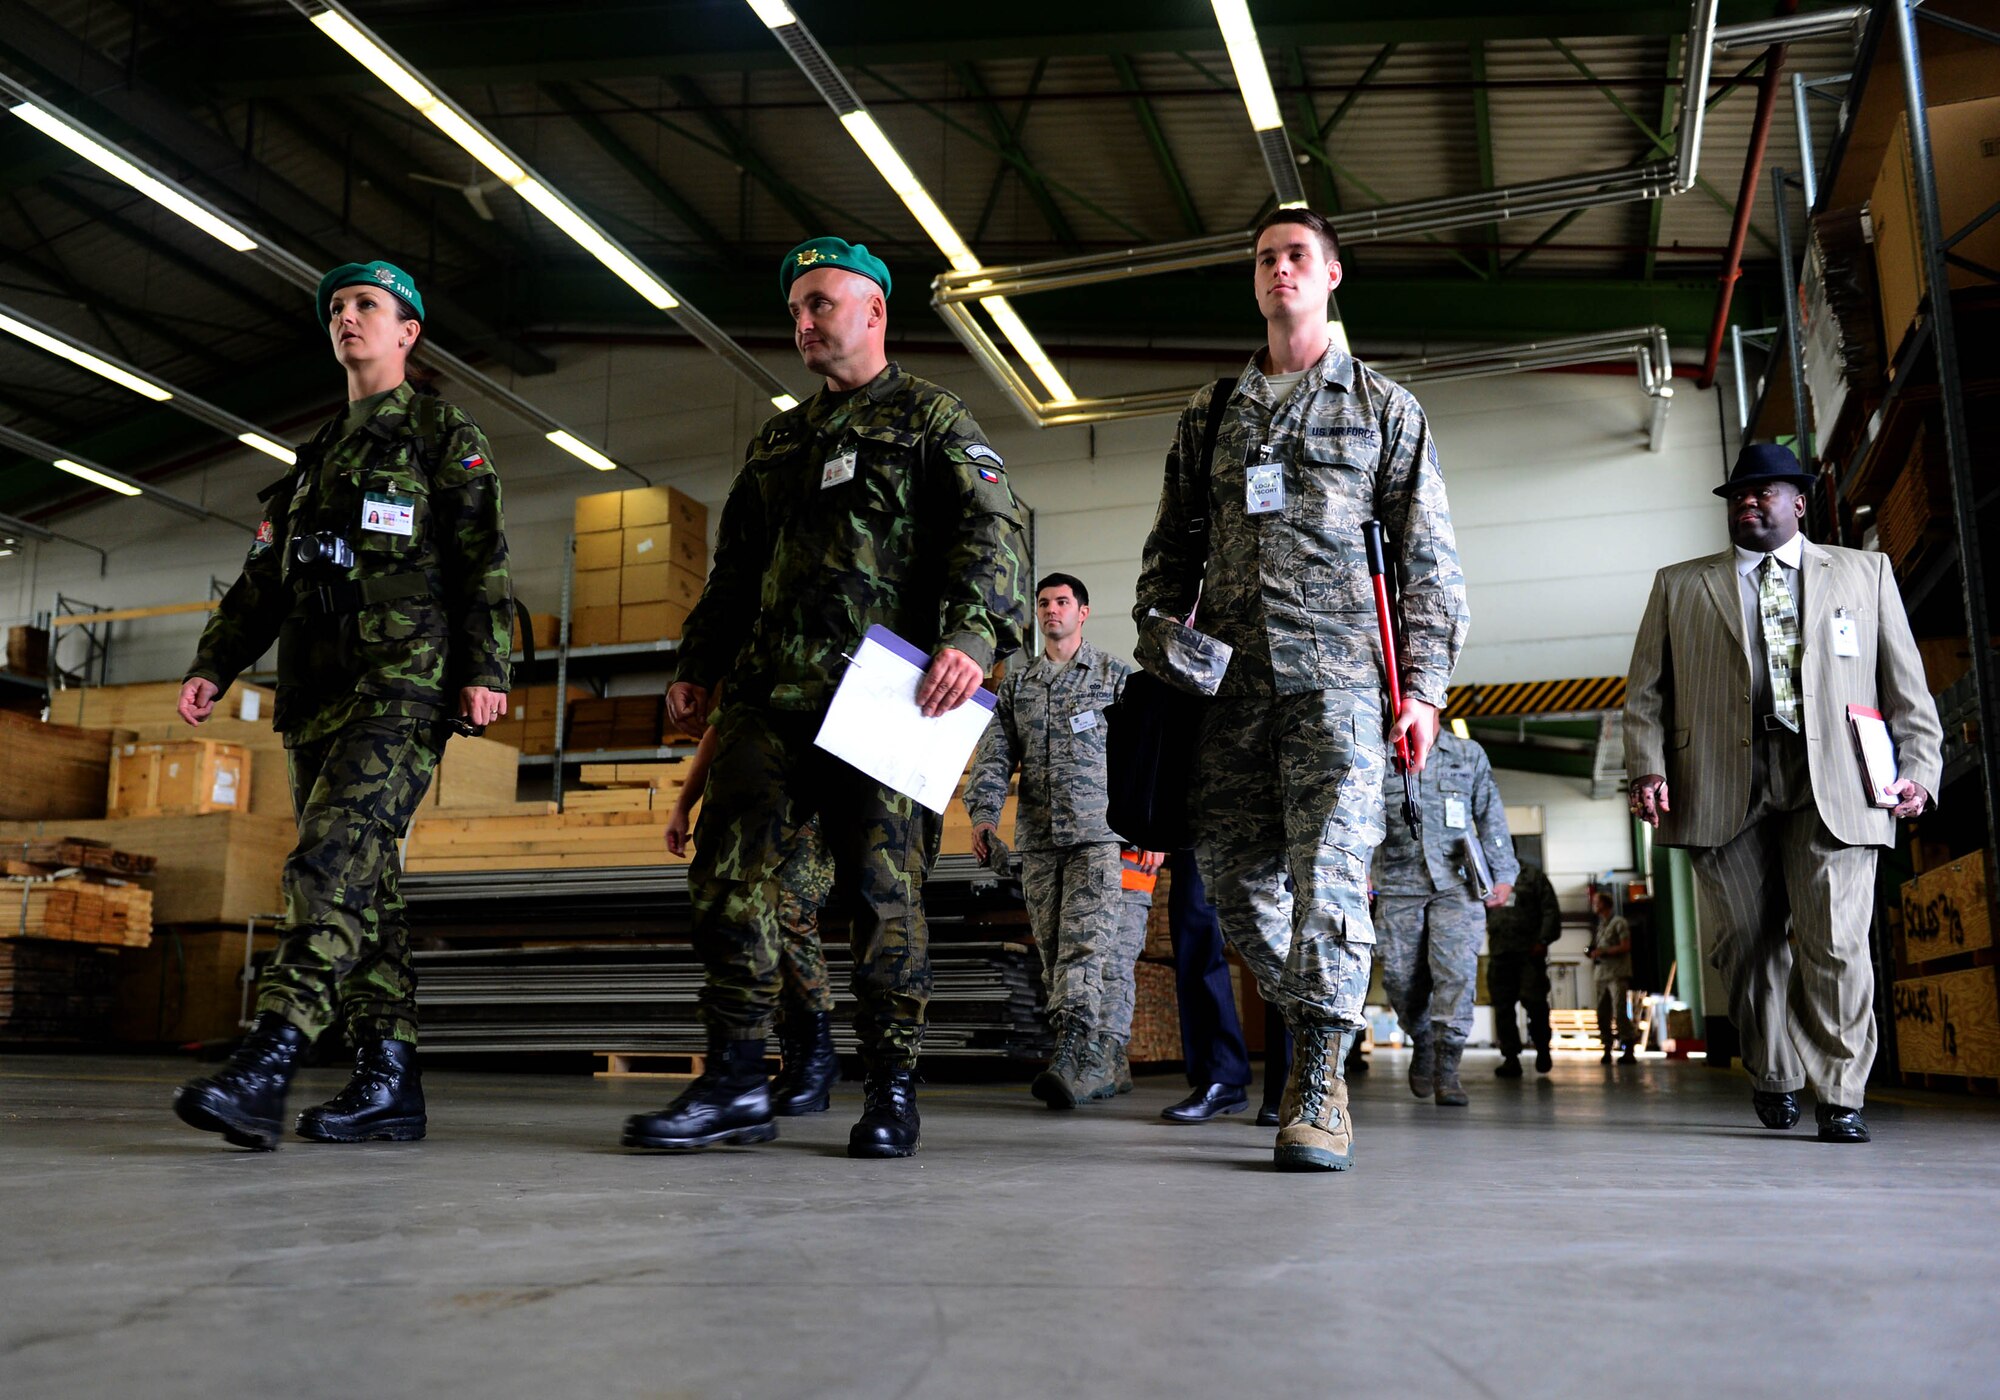 Inspectors from the Conventional Armed Forces in Europe treaty verification team walk through buildings during an exercise at Spangdahlem Air Base, Germany, Sept. 29, 2014. The inspectors visited the base as part of an exercise hosted by the 52nd Fighter Wing. The U.S. Air Force invited service members from both the Czech Republic and France to take part in the inspection exercise as the treaty verification team. The inspectors determined the U.S. Air Force’s compliance with CFE treaty regulations. (U.S. Air Force photo by Airman 1st Class Kyle Gese/Released)